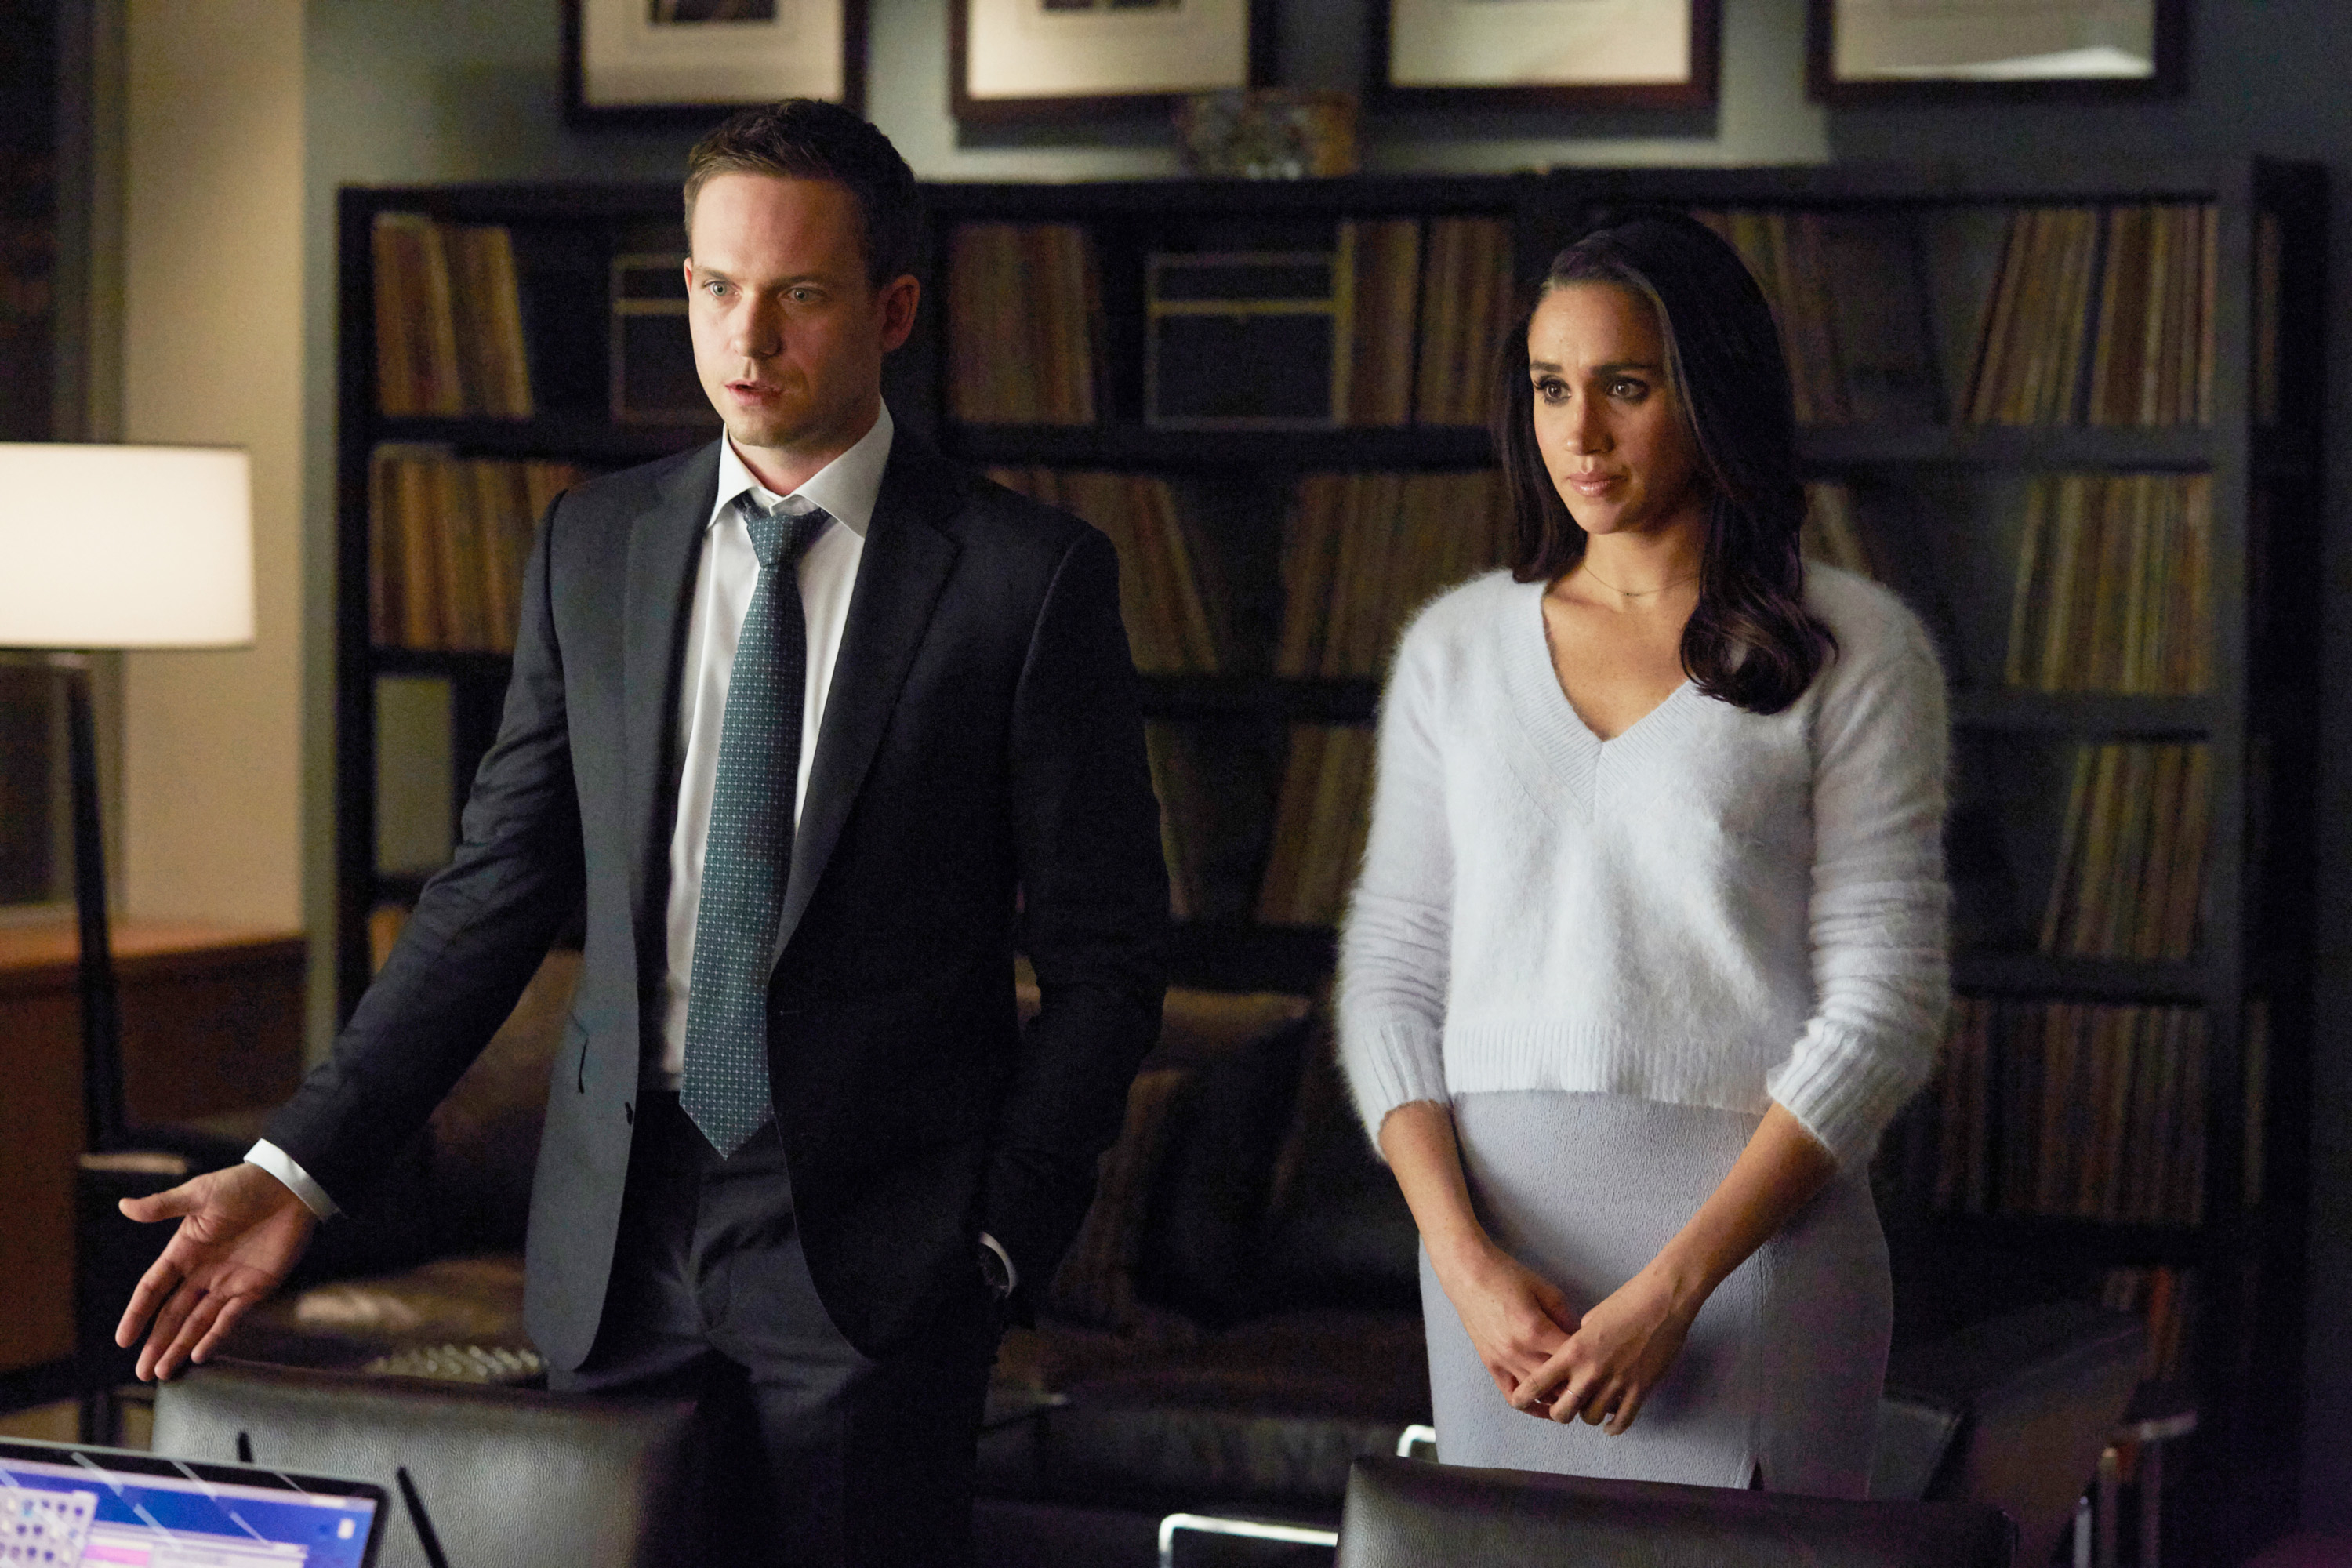 Michael Ross, played by Patrick J. Adams, and Rachel Zane, played by Meghan Markle, standing side by side in an office